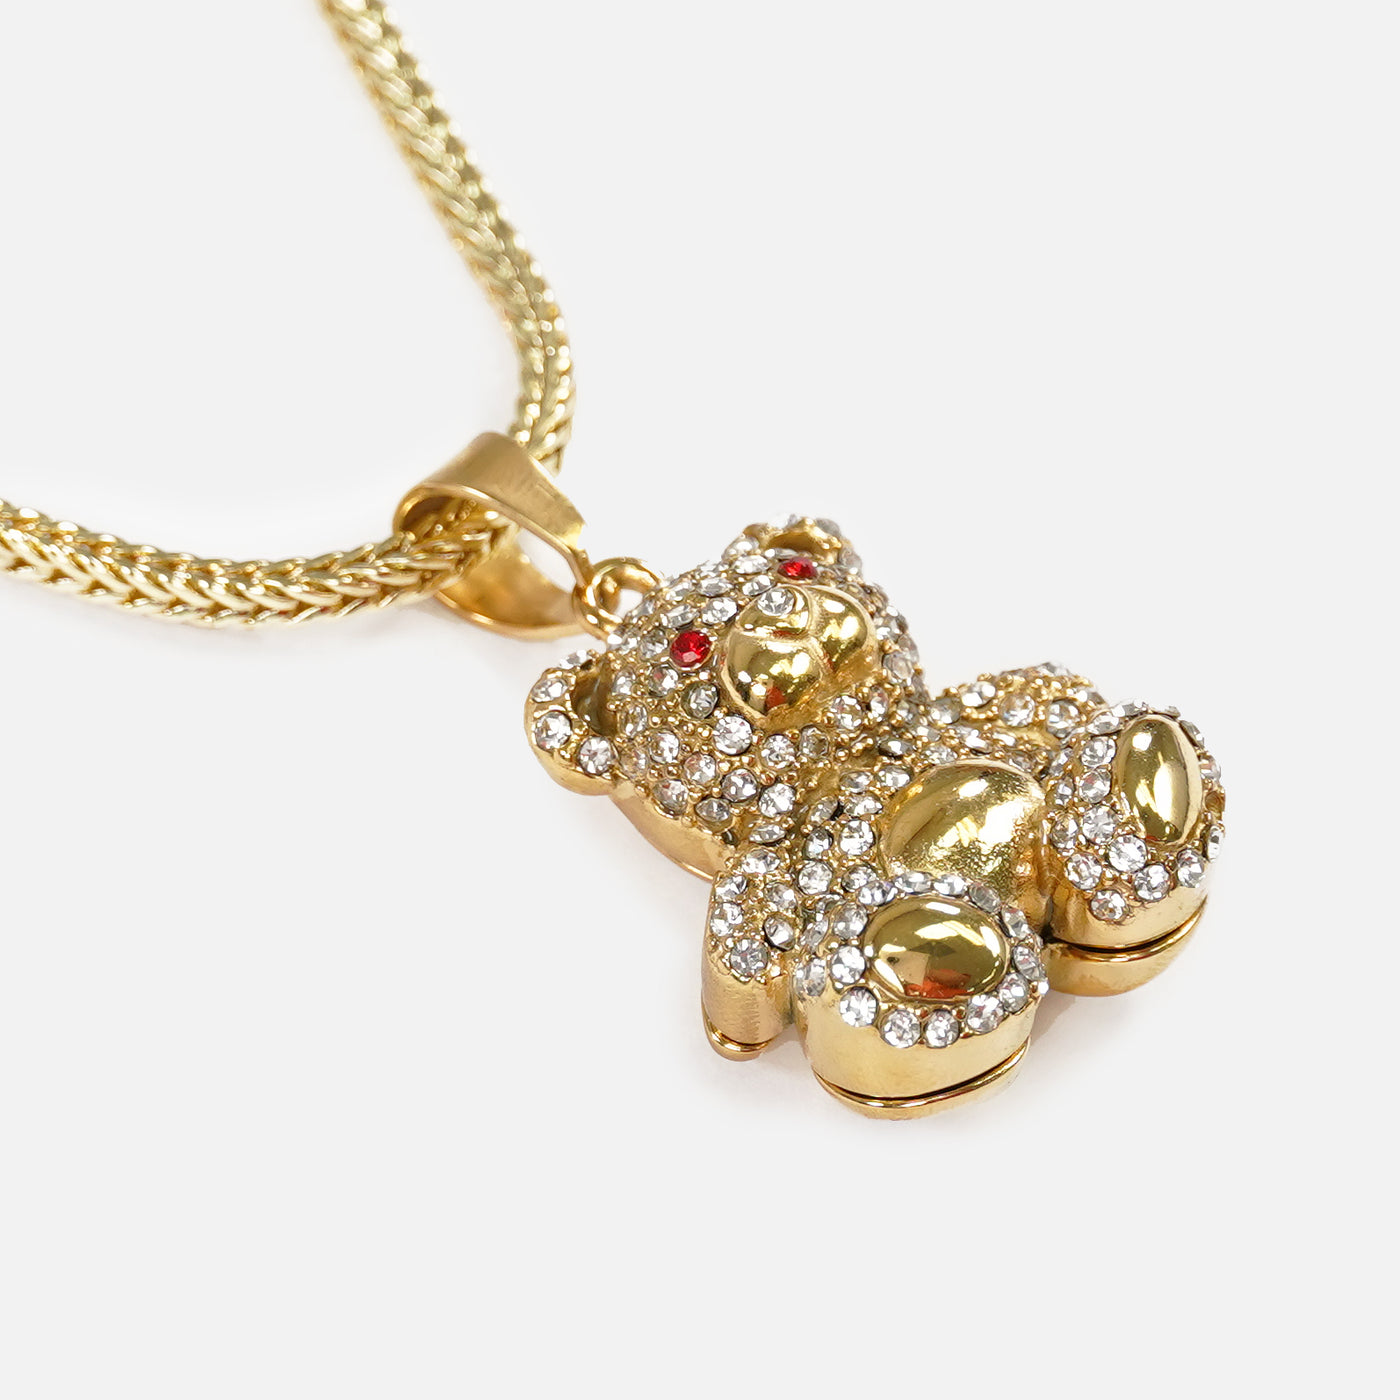 Teddy Bear 1½" Pendant with Chain Necklace - Gold Plated Stainless Steel